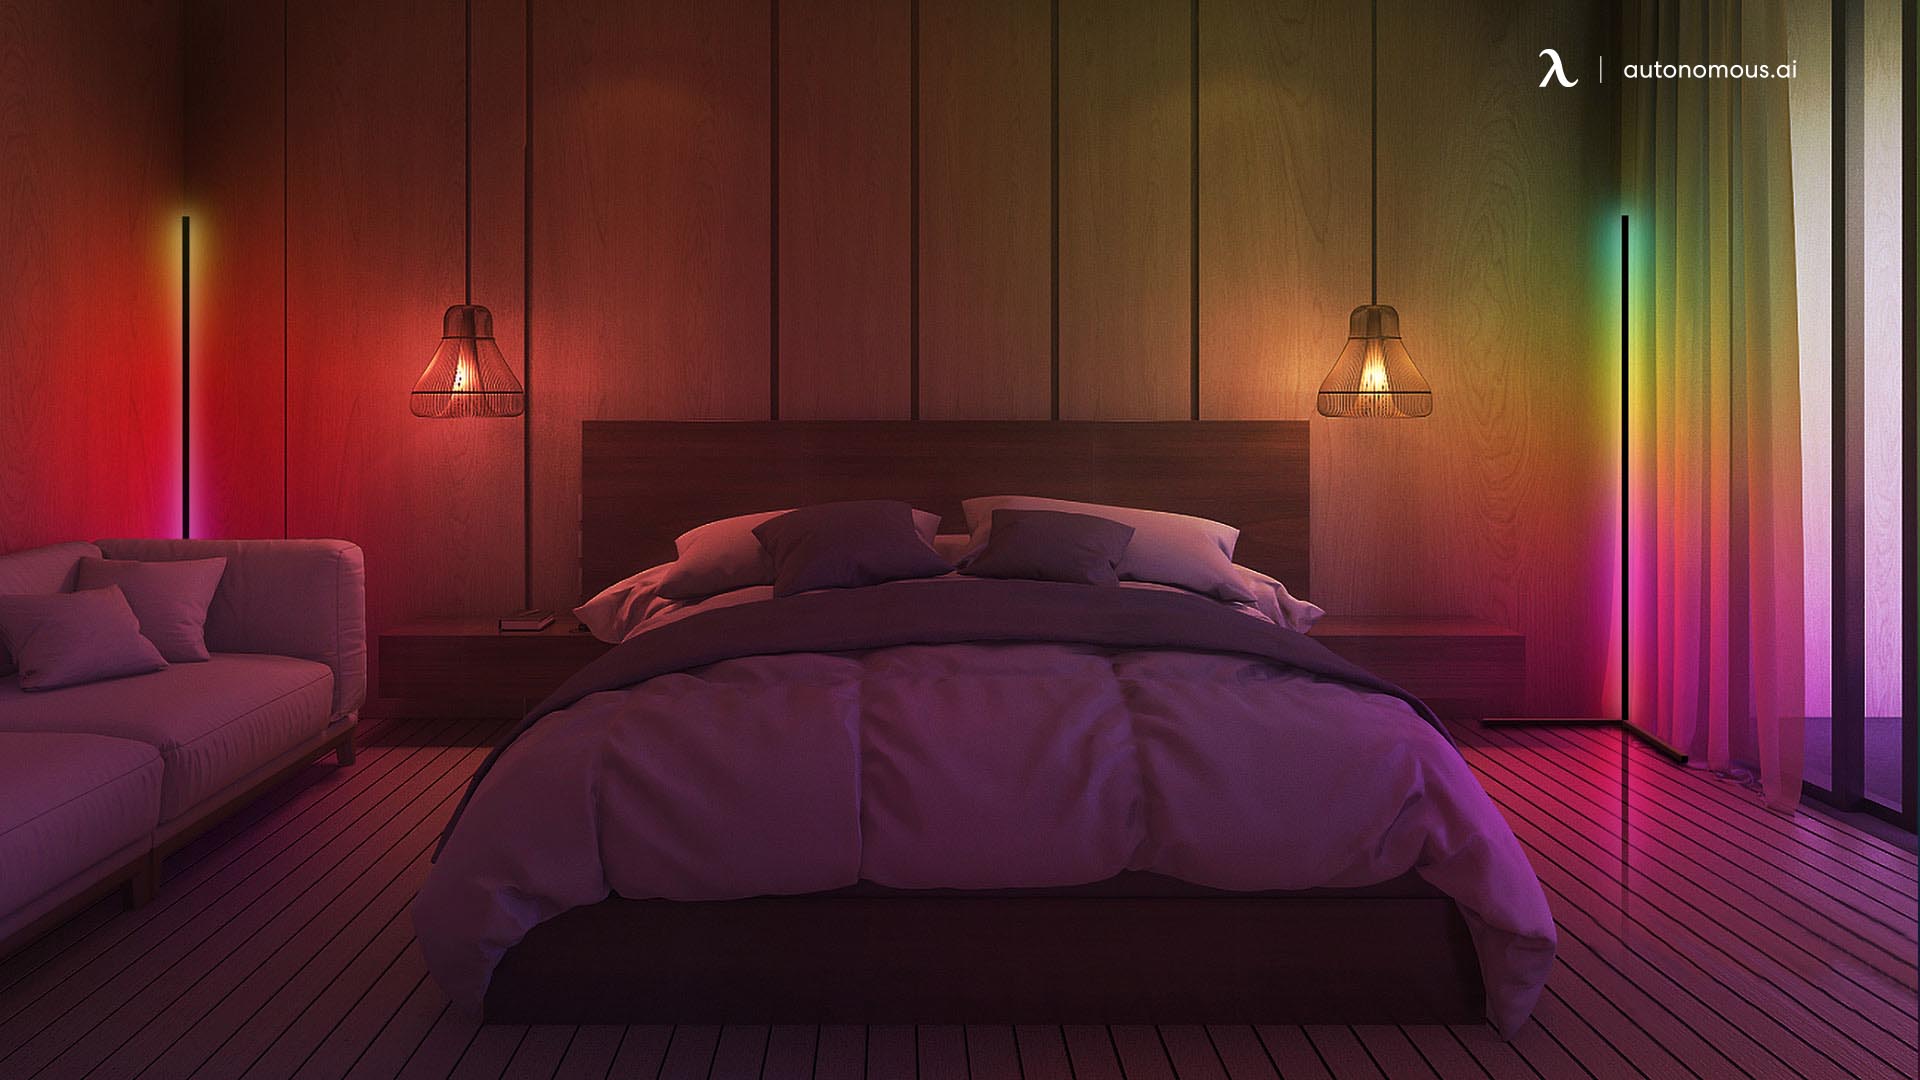 Light up your bedrooms nicely